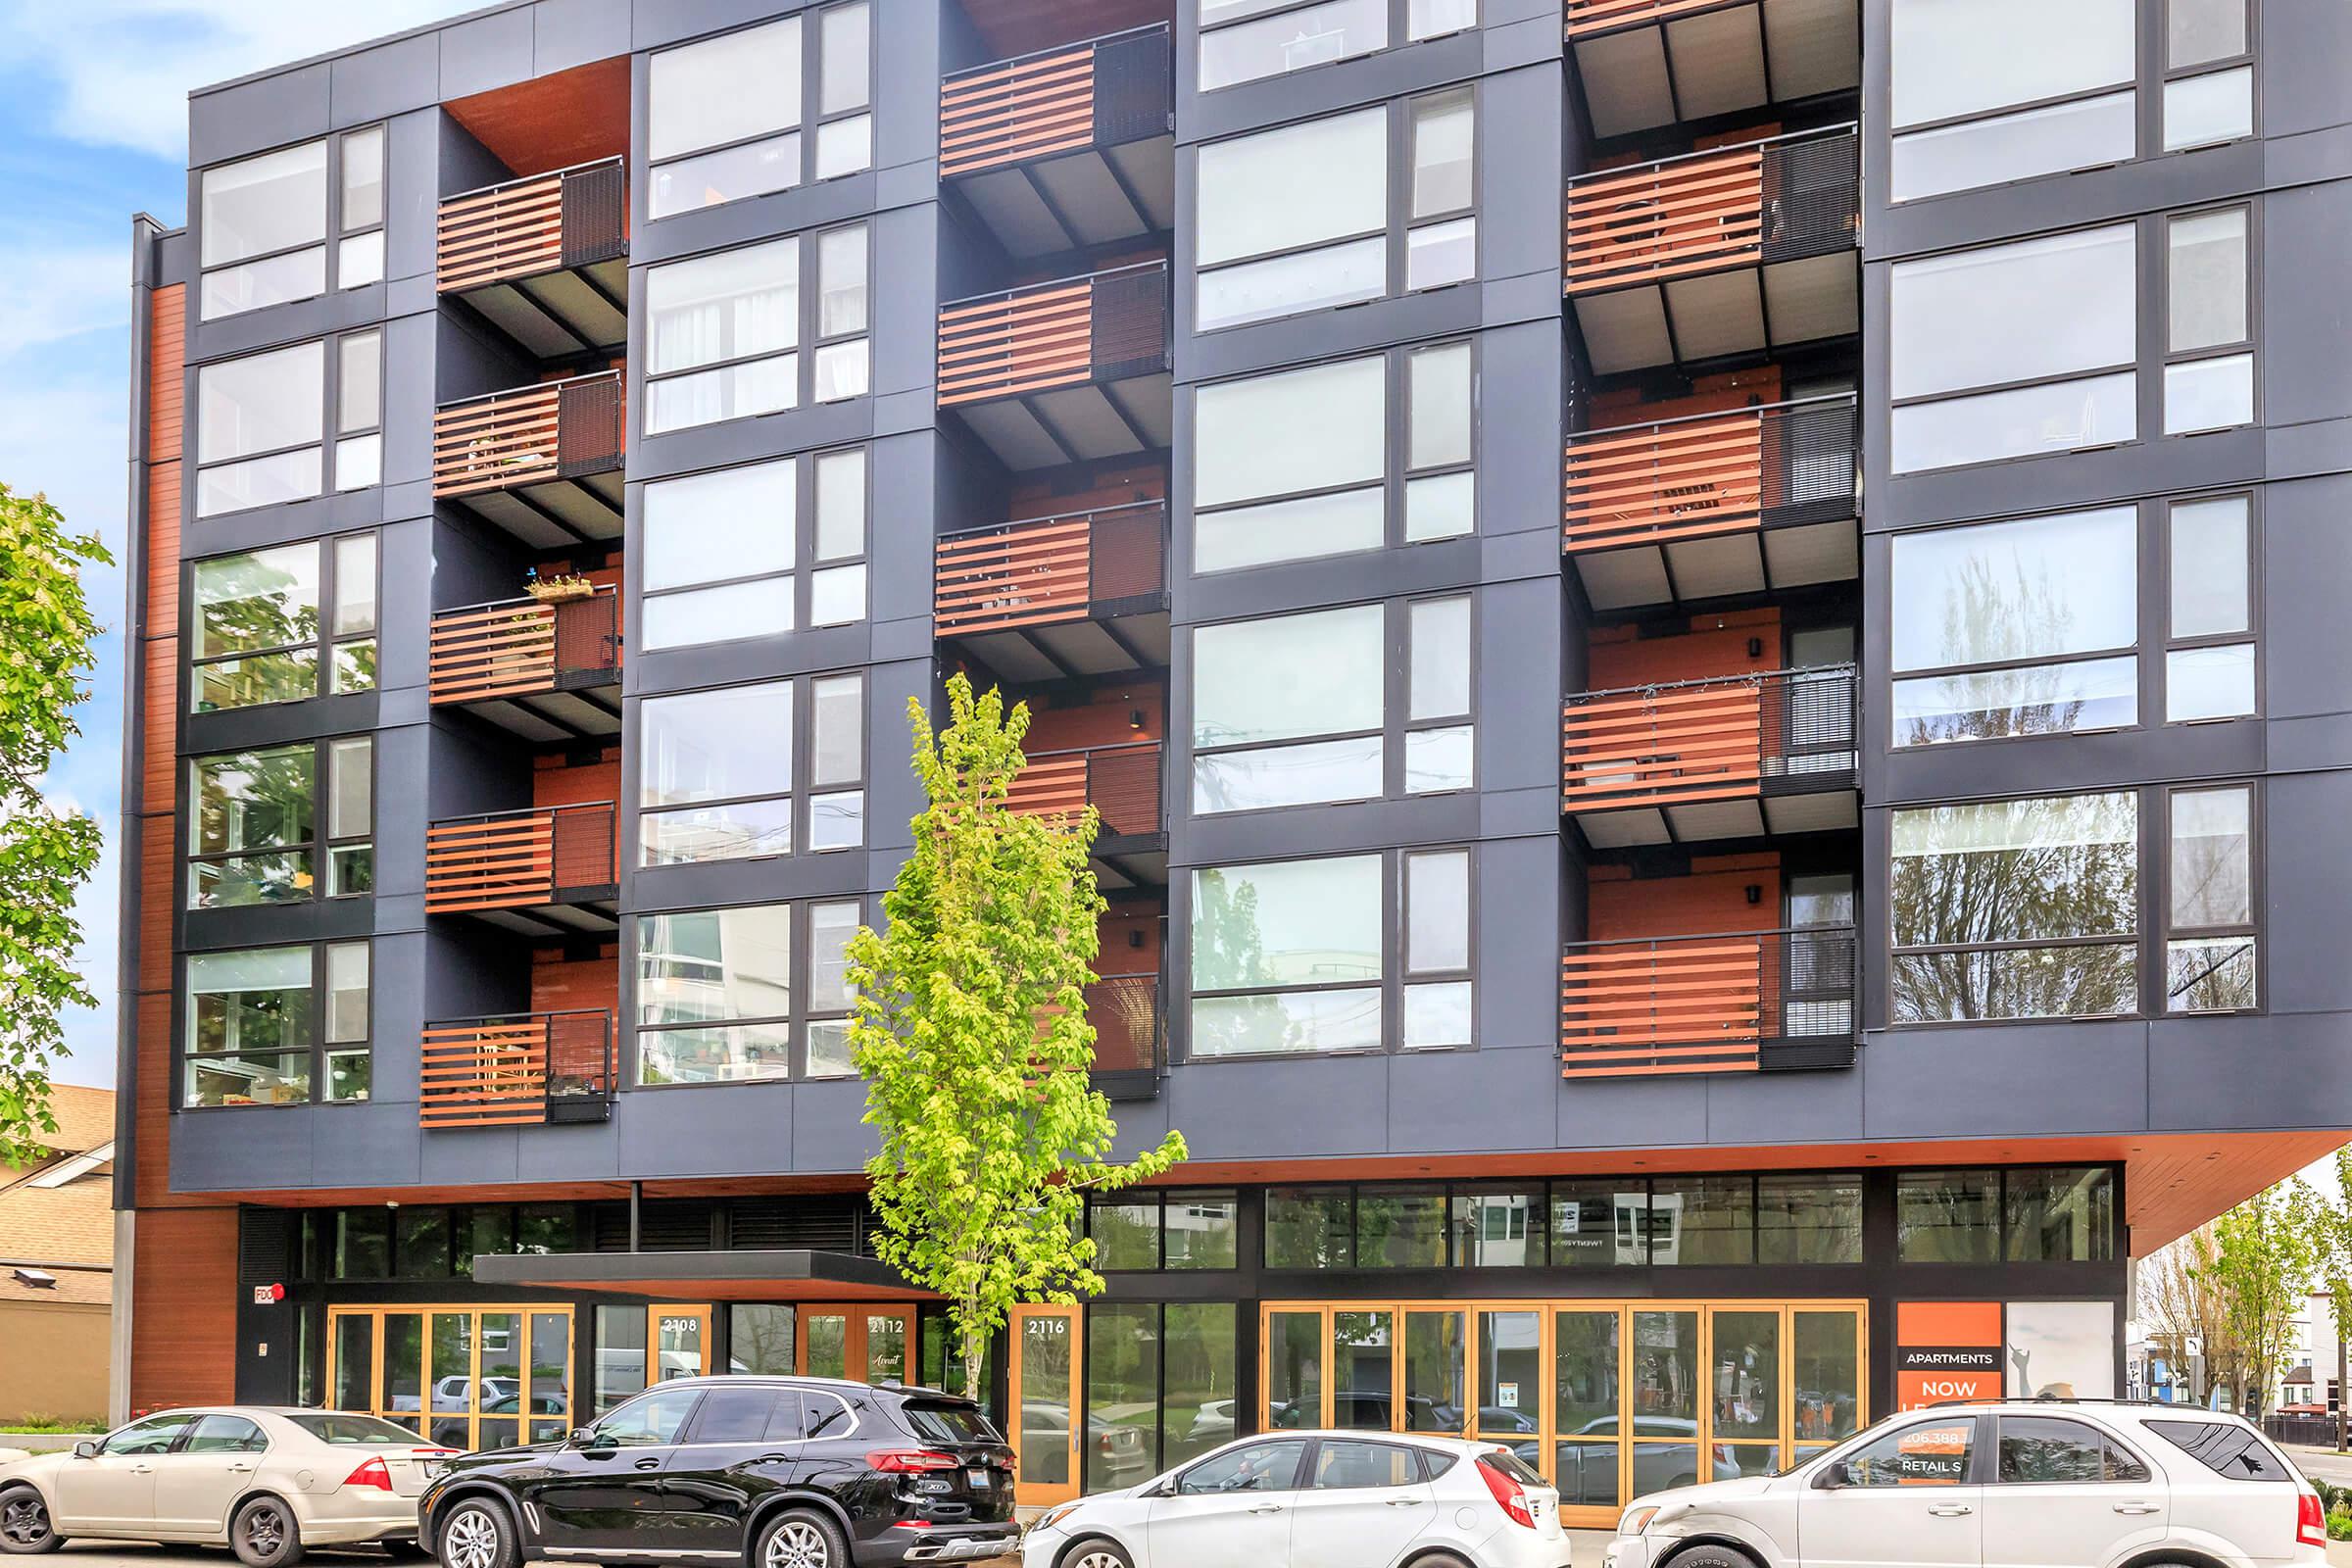 STUDIO, 1 AND 2 BEDROOM APARTMENTS IN SEATTLE, WA